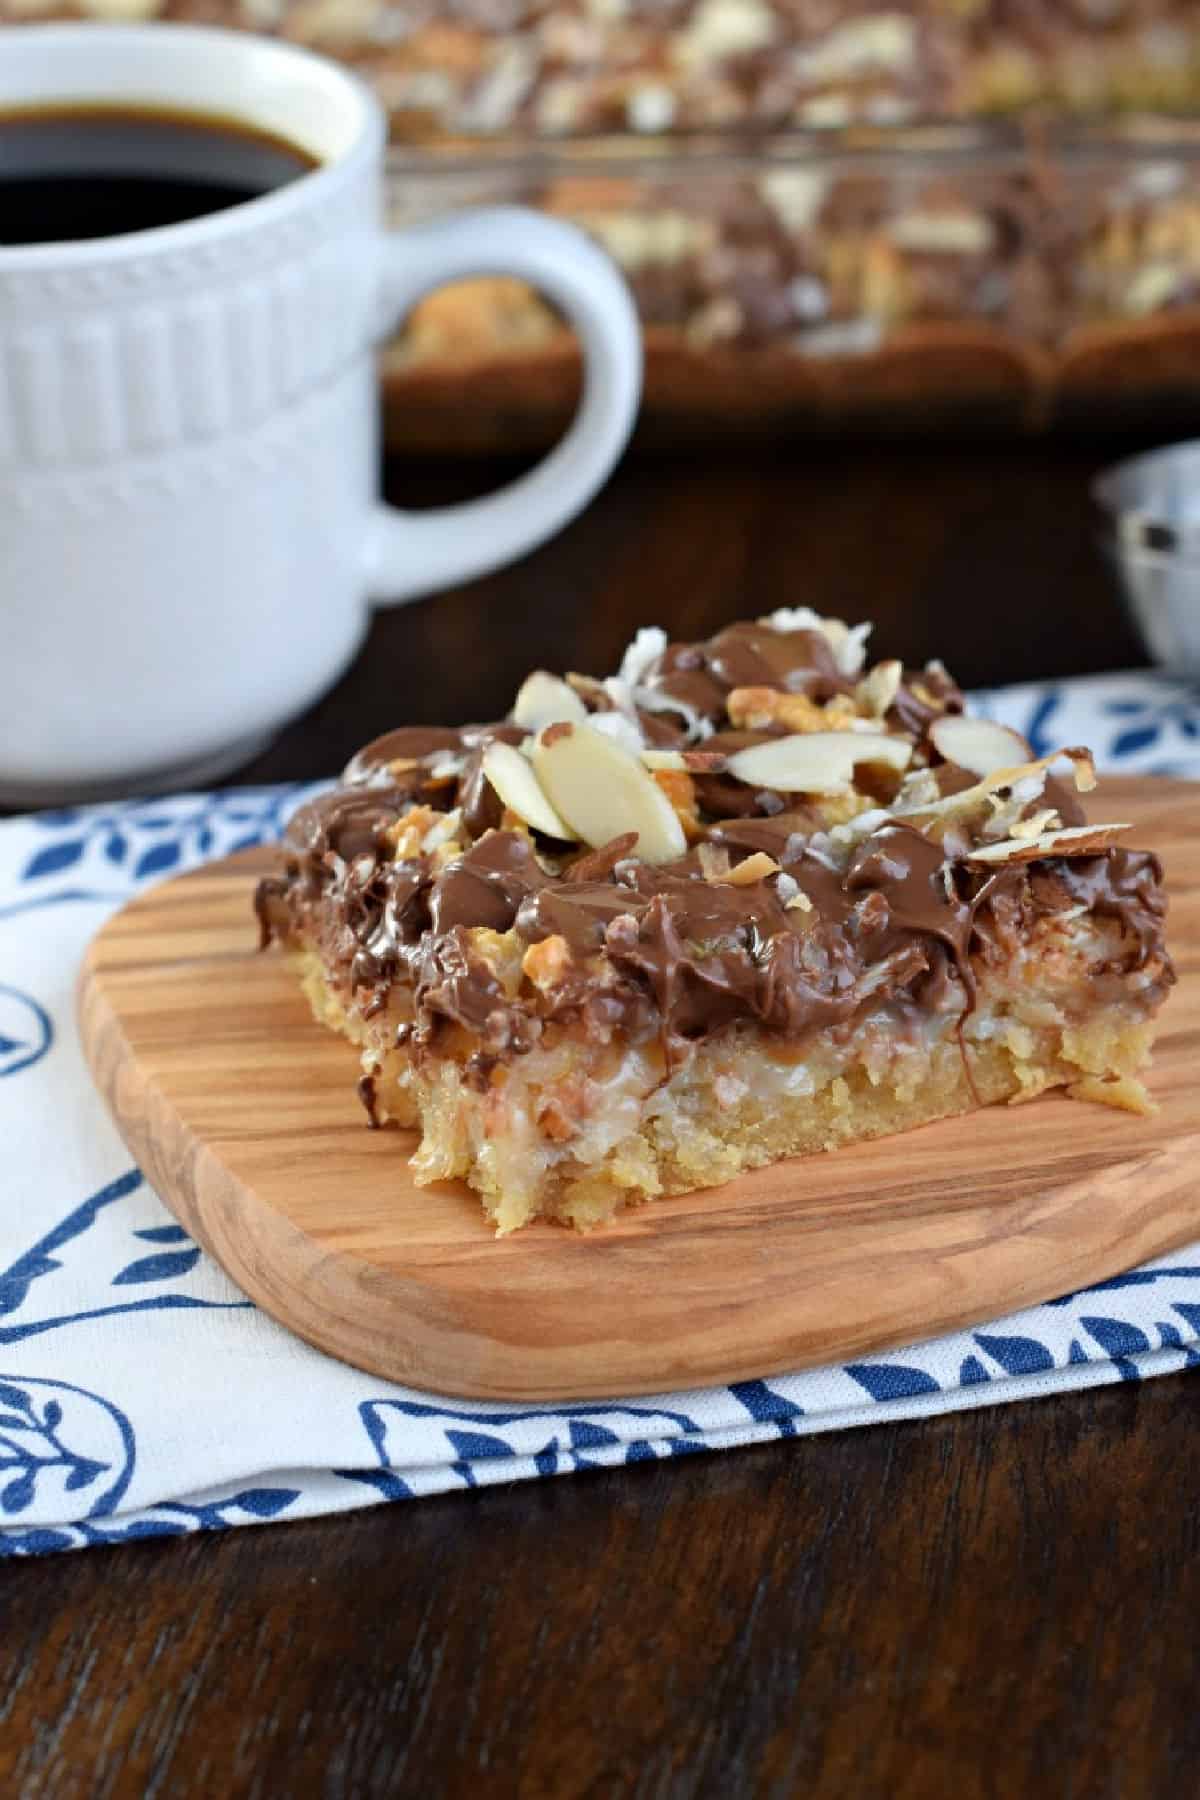 Slice of coconut almond bar on wooden plate with cup of coffee.